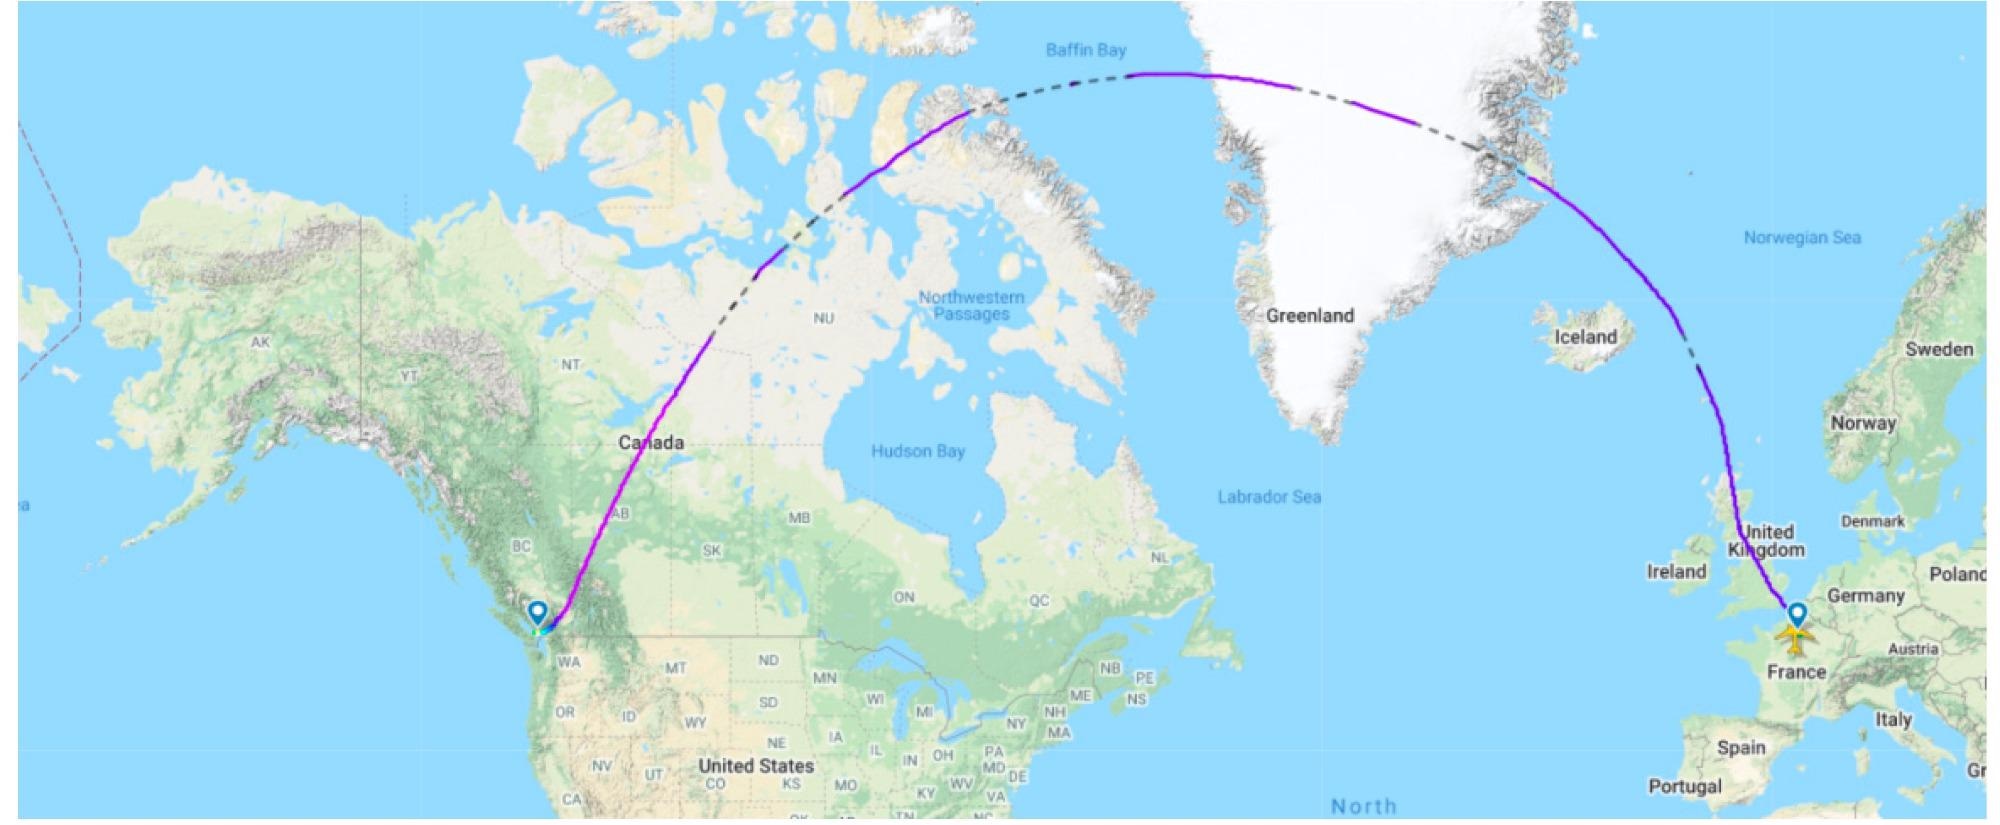 The flight route between Paris and Vancouver adopted for the research.